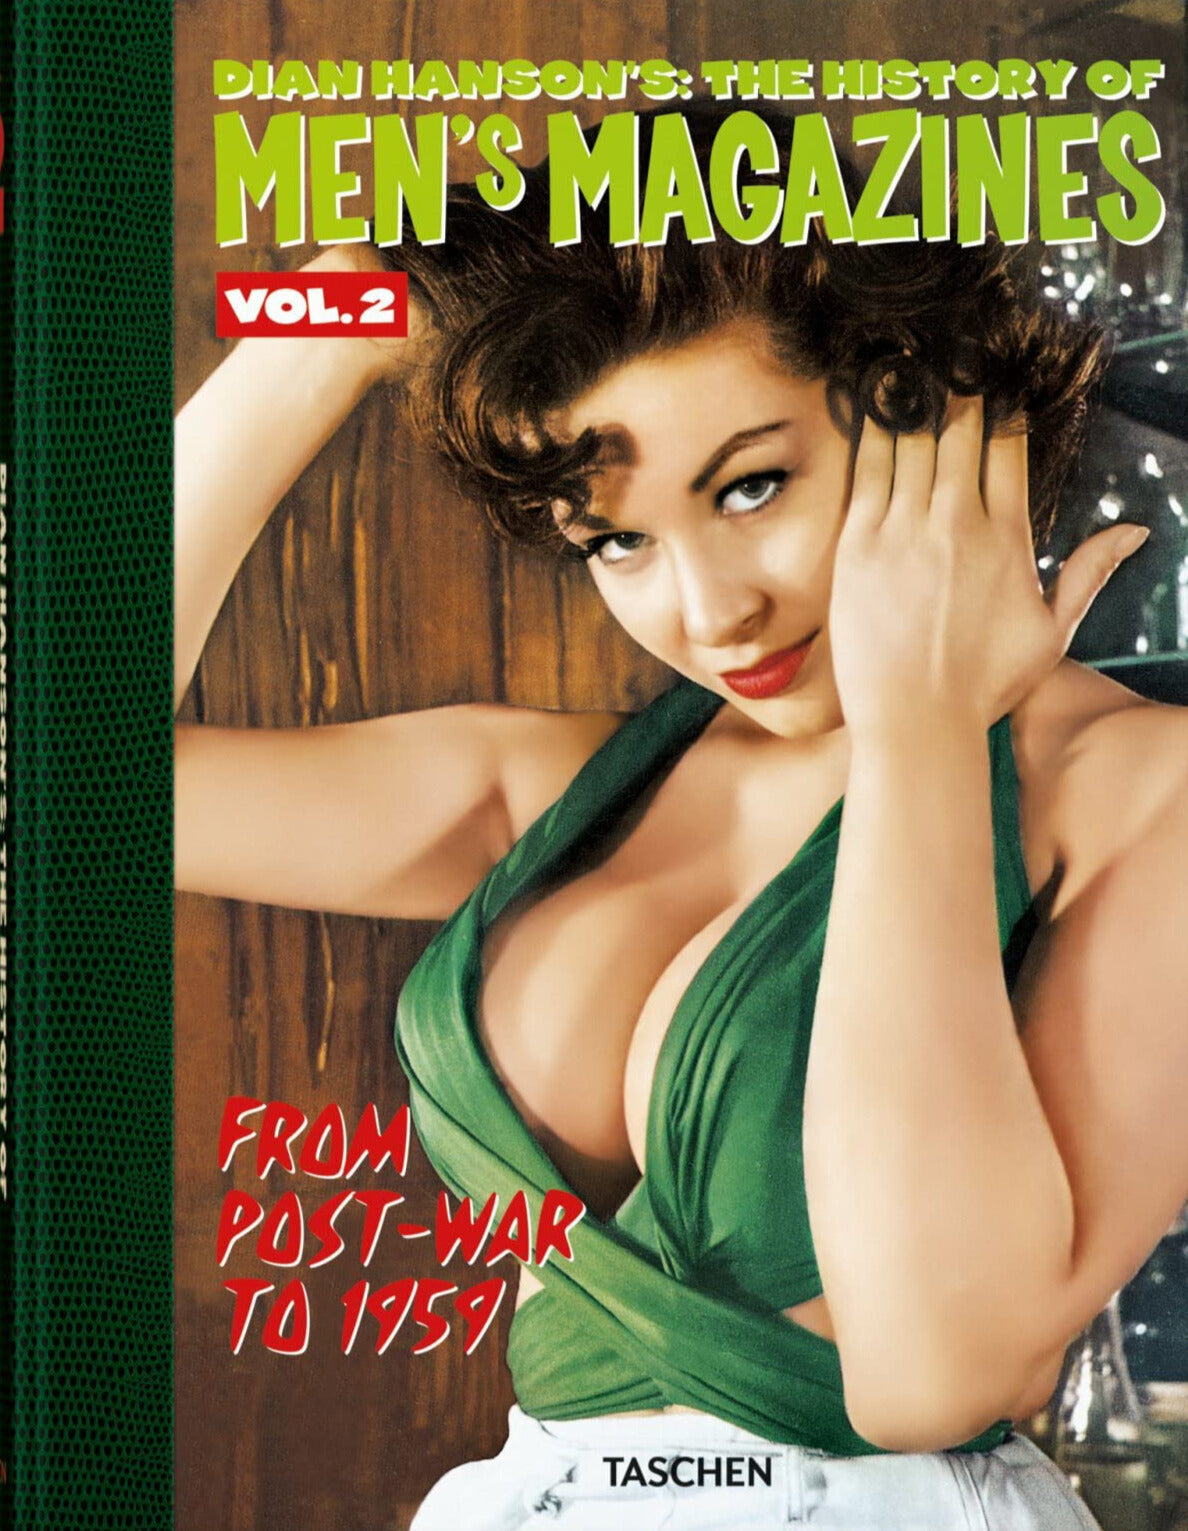 Dian Hanson’s: The History of Men’s Magazines. Vol. 2: From Post-War to 1959